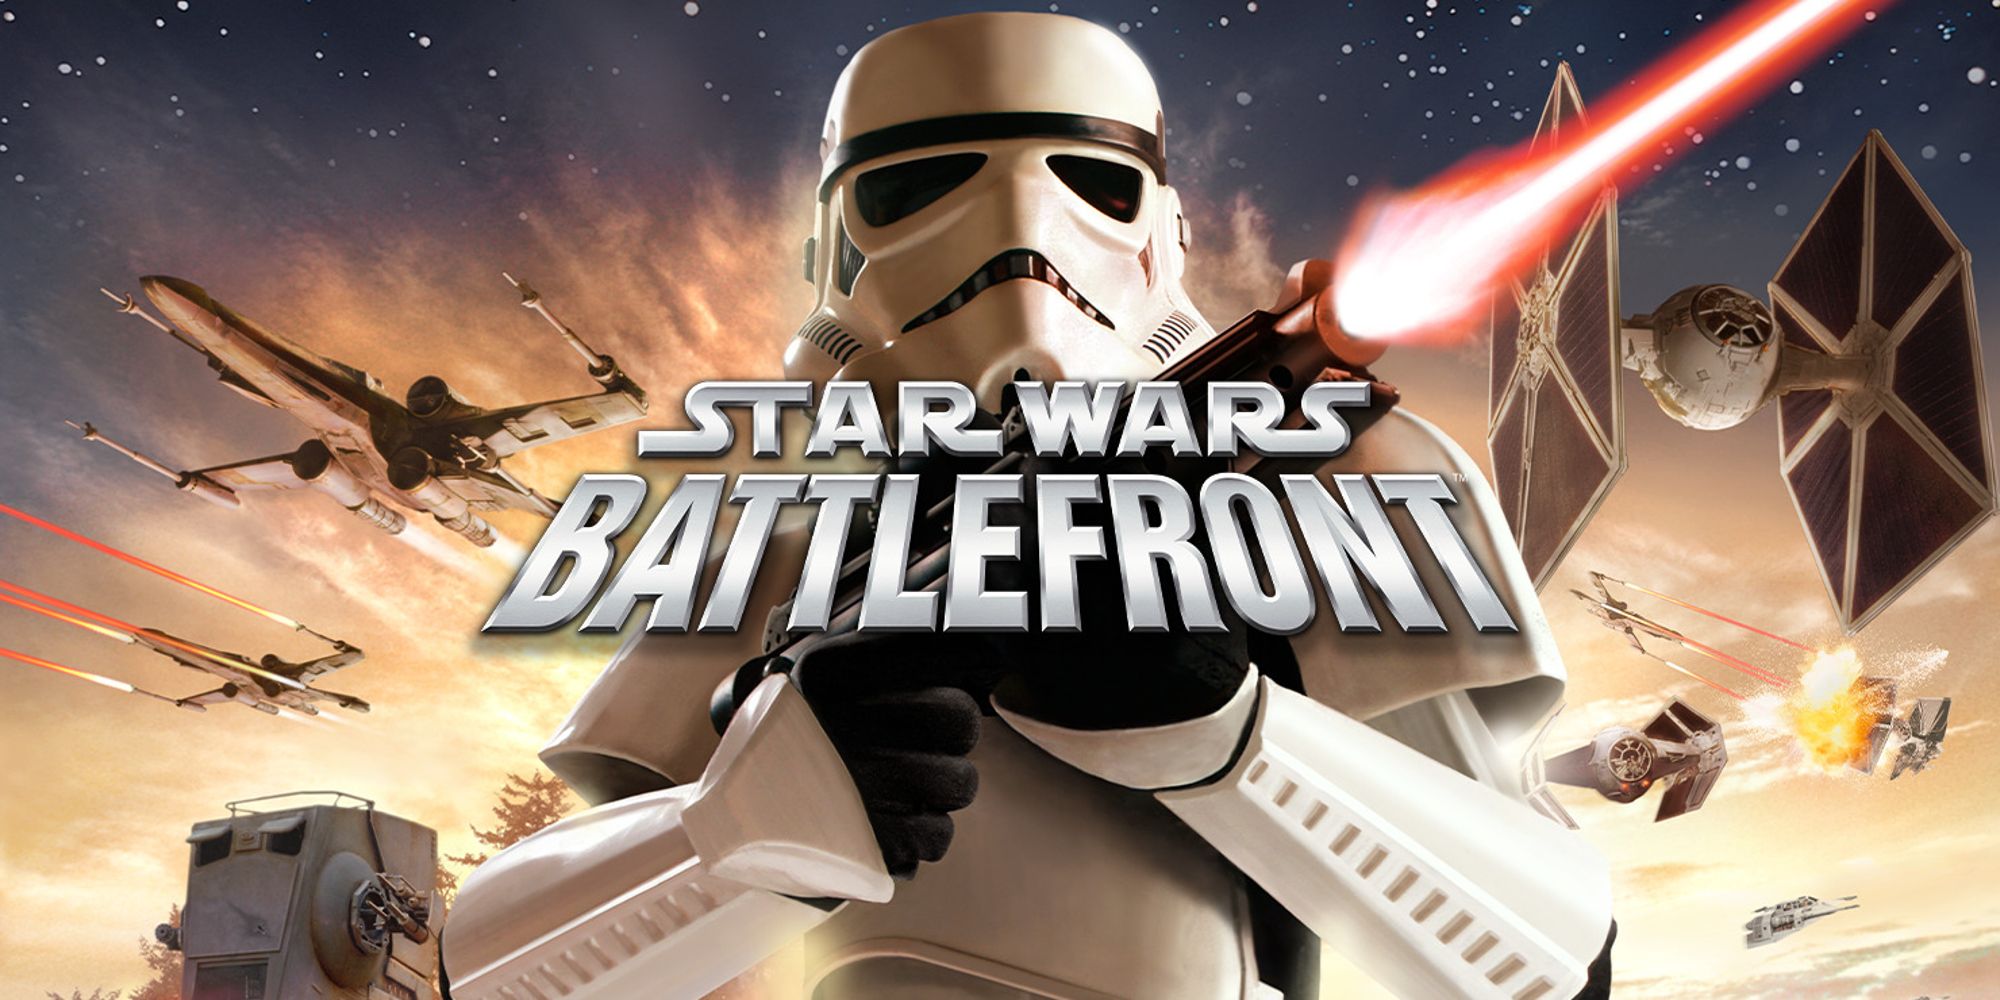 Stormtrooper marching while firing a blaster in promo banner for Star Wars Battlefront 2004